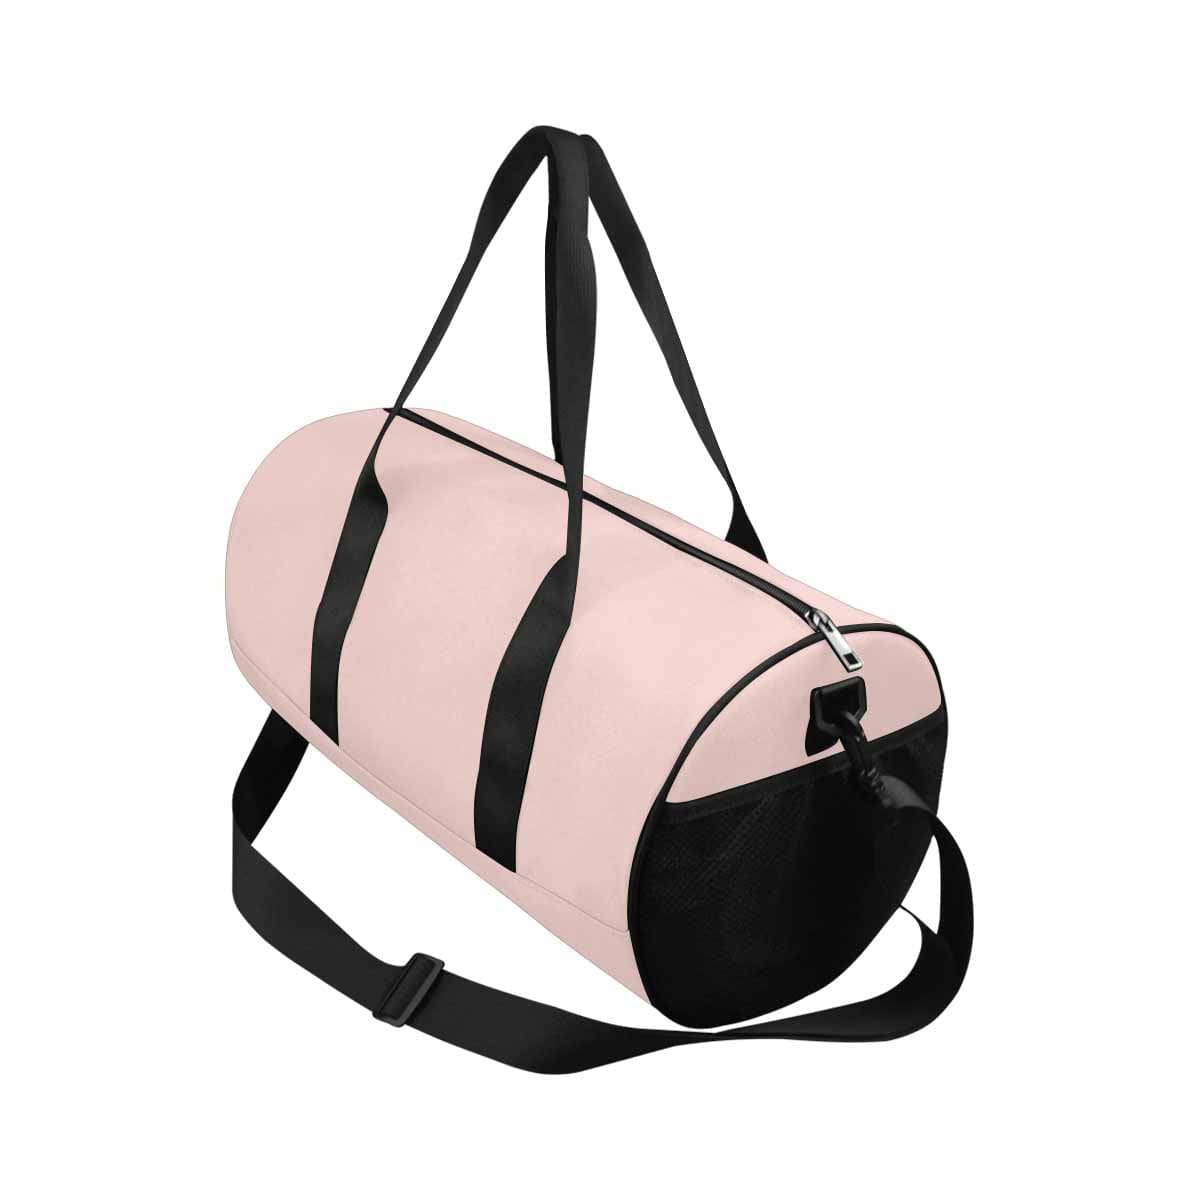 Travel Duffel Bag Scallop Seashell Pink Carry On - Bags | Duffel Bags